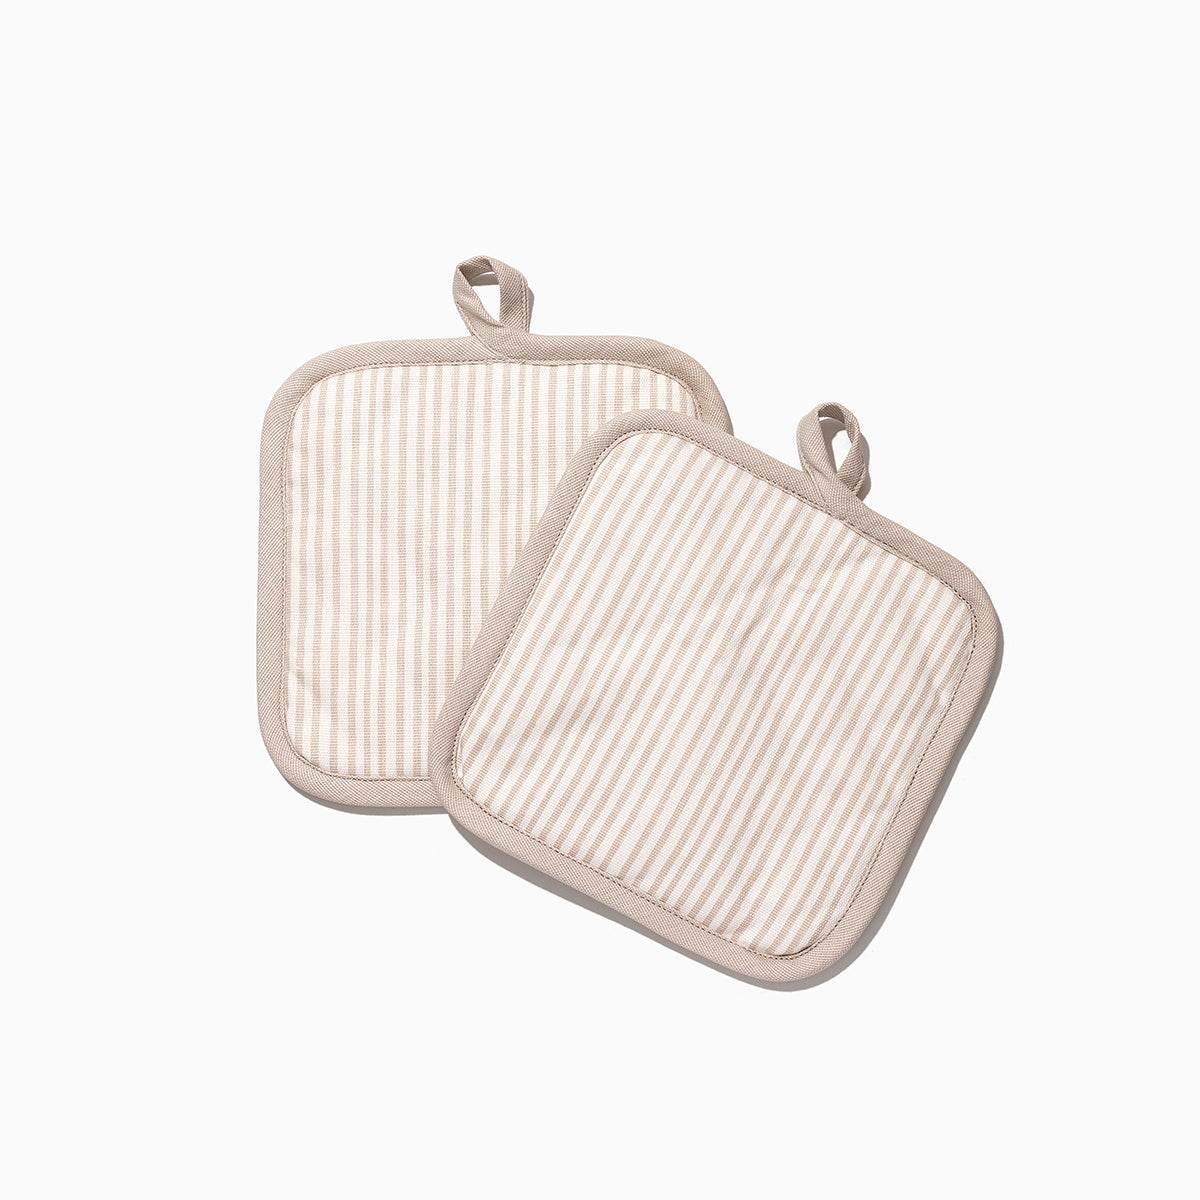 Tan Striped Pot Holder (Set of 2) | Product Image | Uncommon Lifestyle